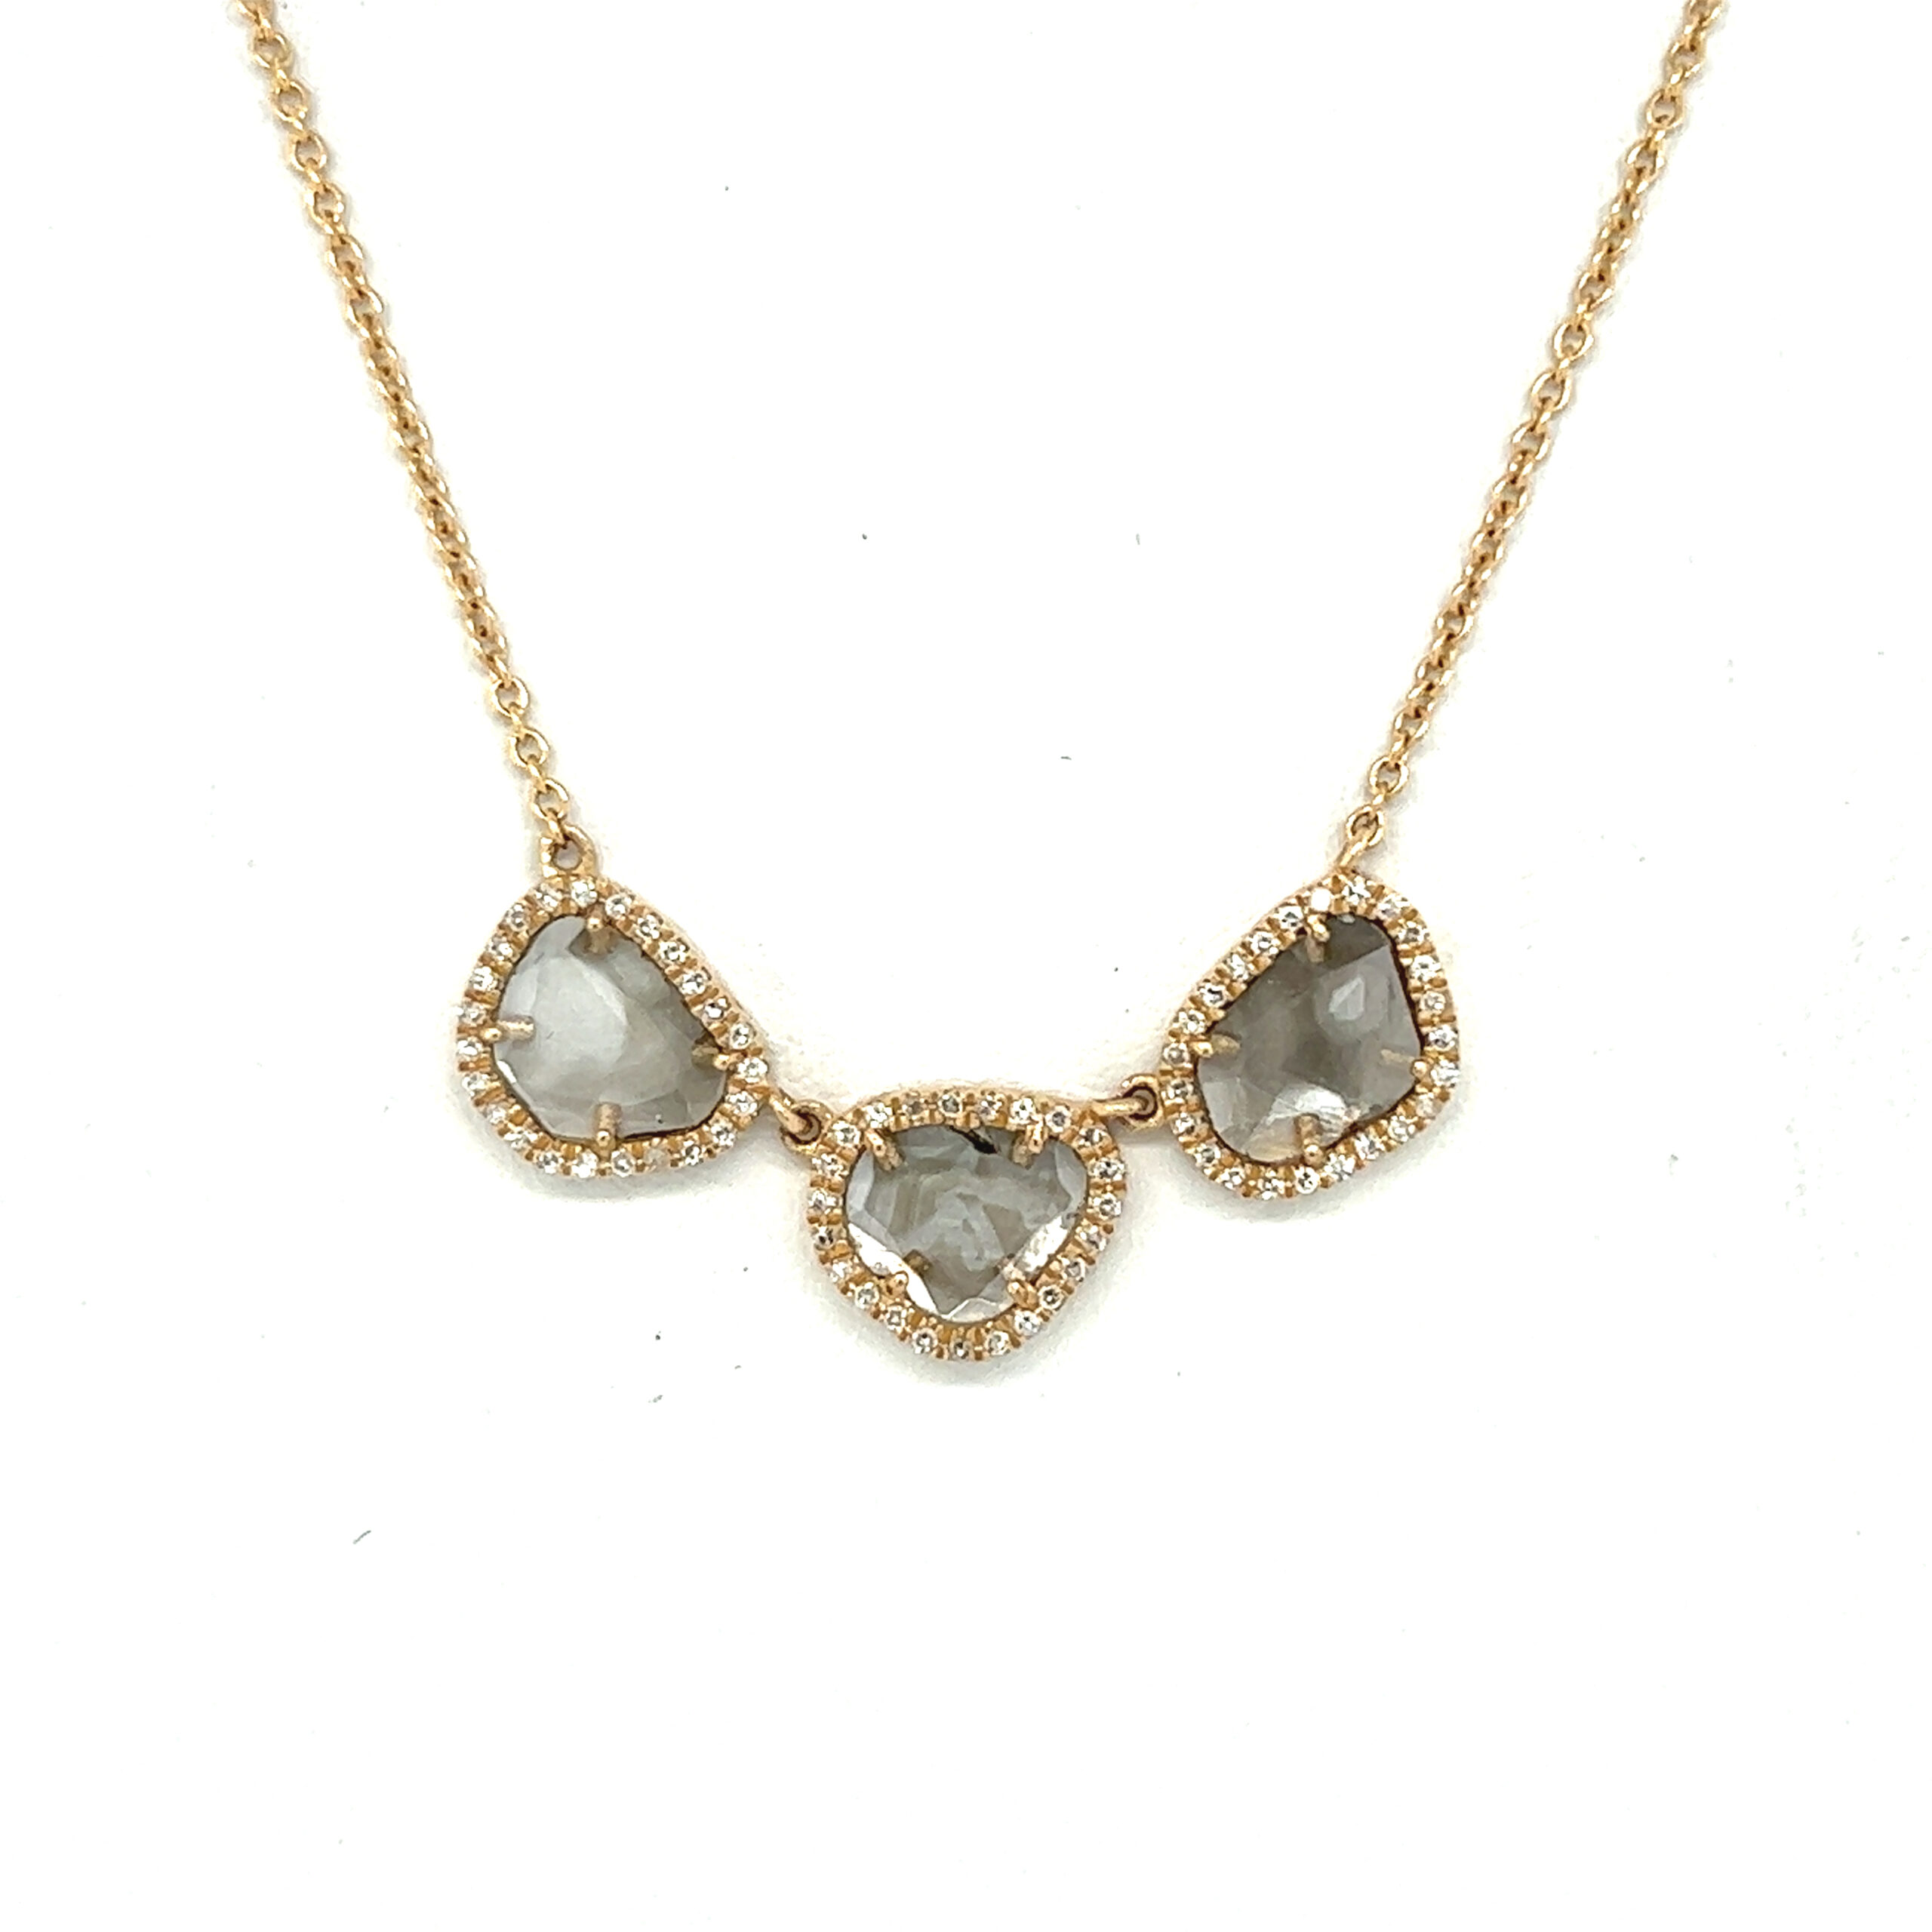 Featured image for “Champagne Diamond 3 Slices Necklace”